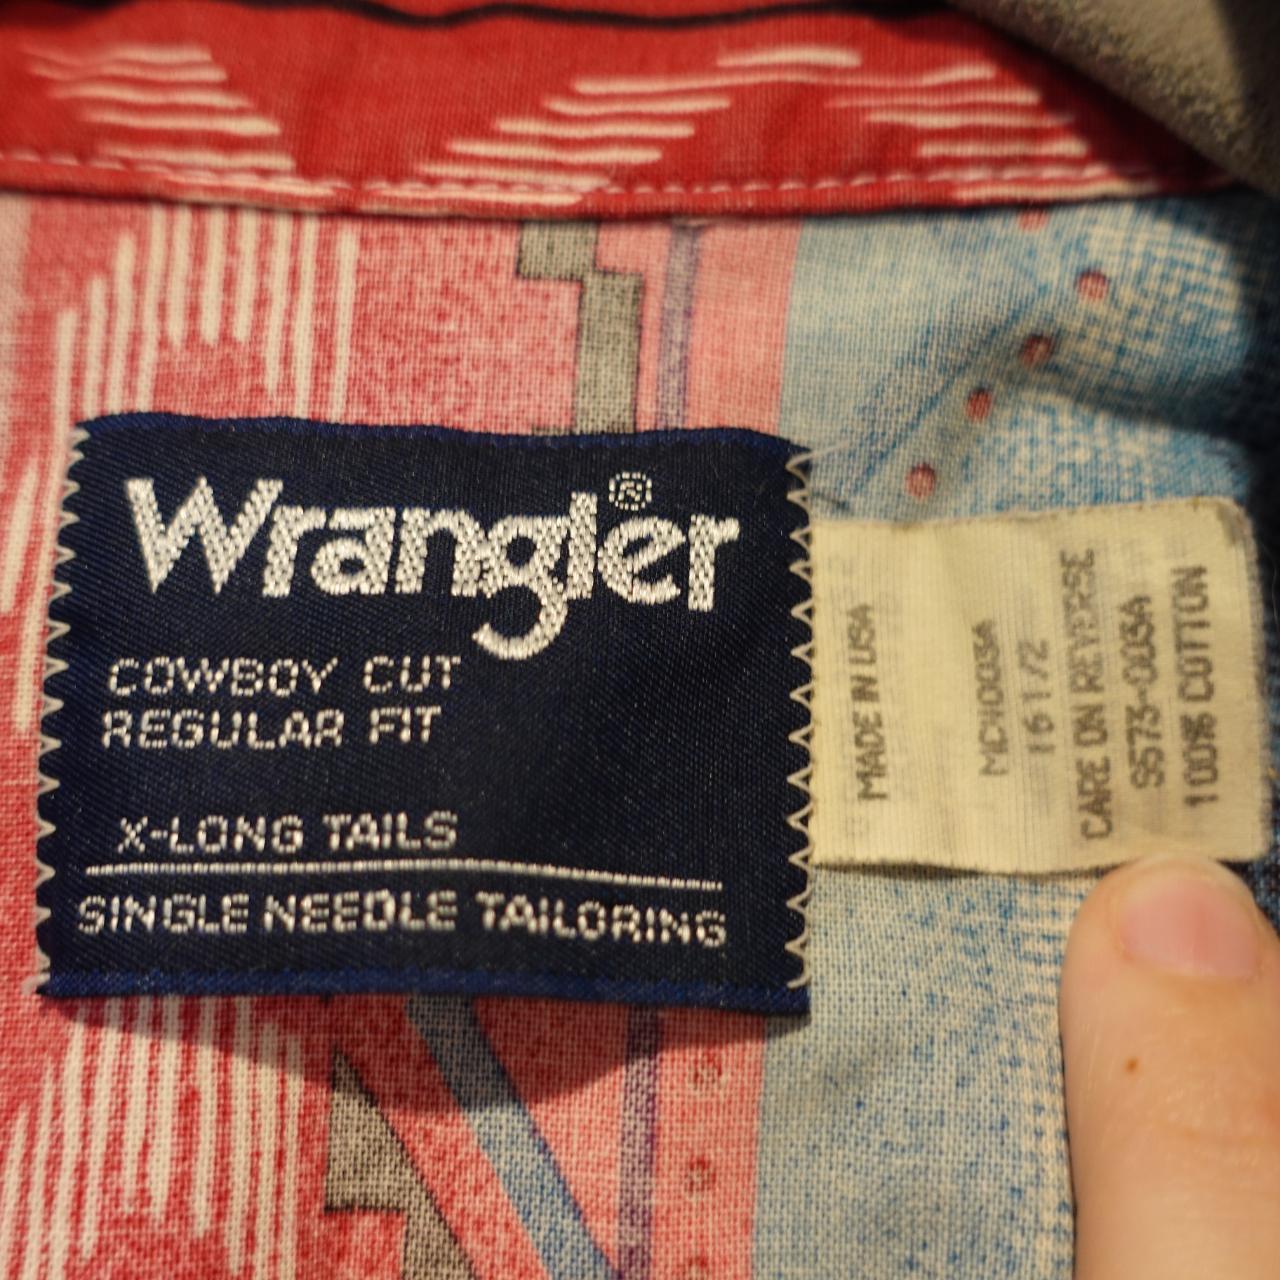 Vintage Wrangler button up. In great condition. - Depop